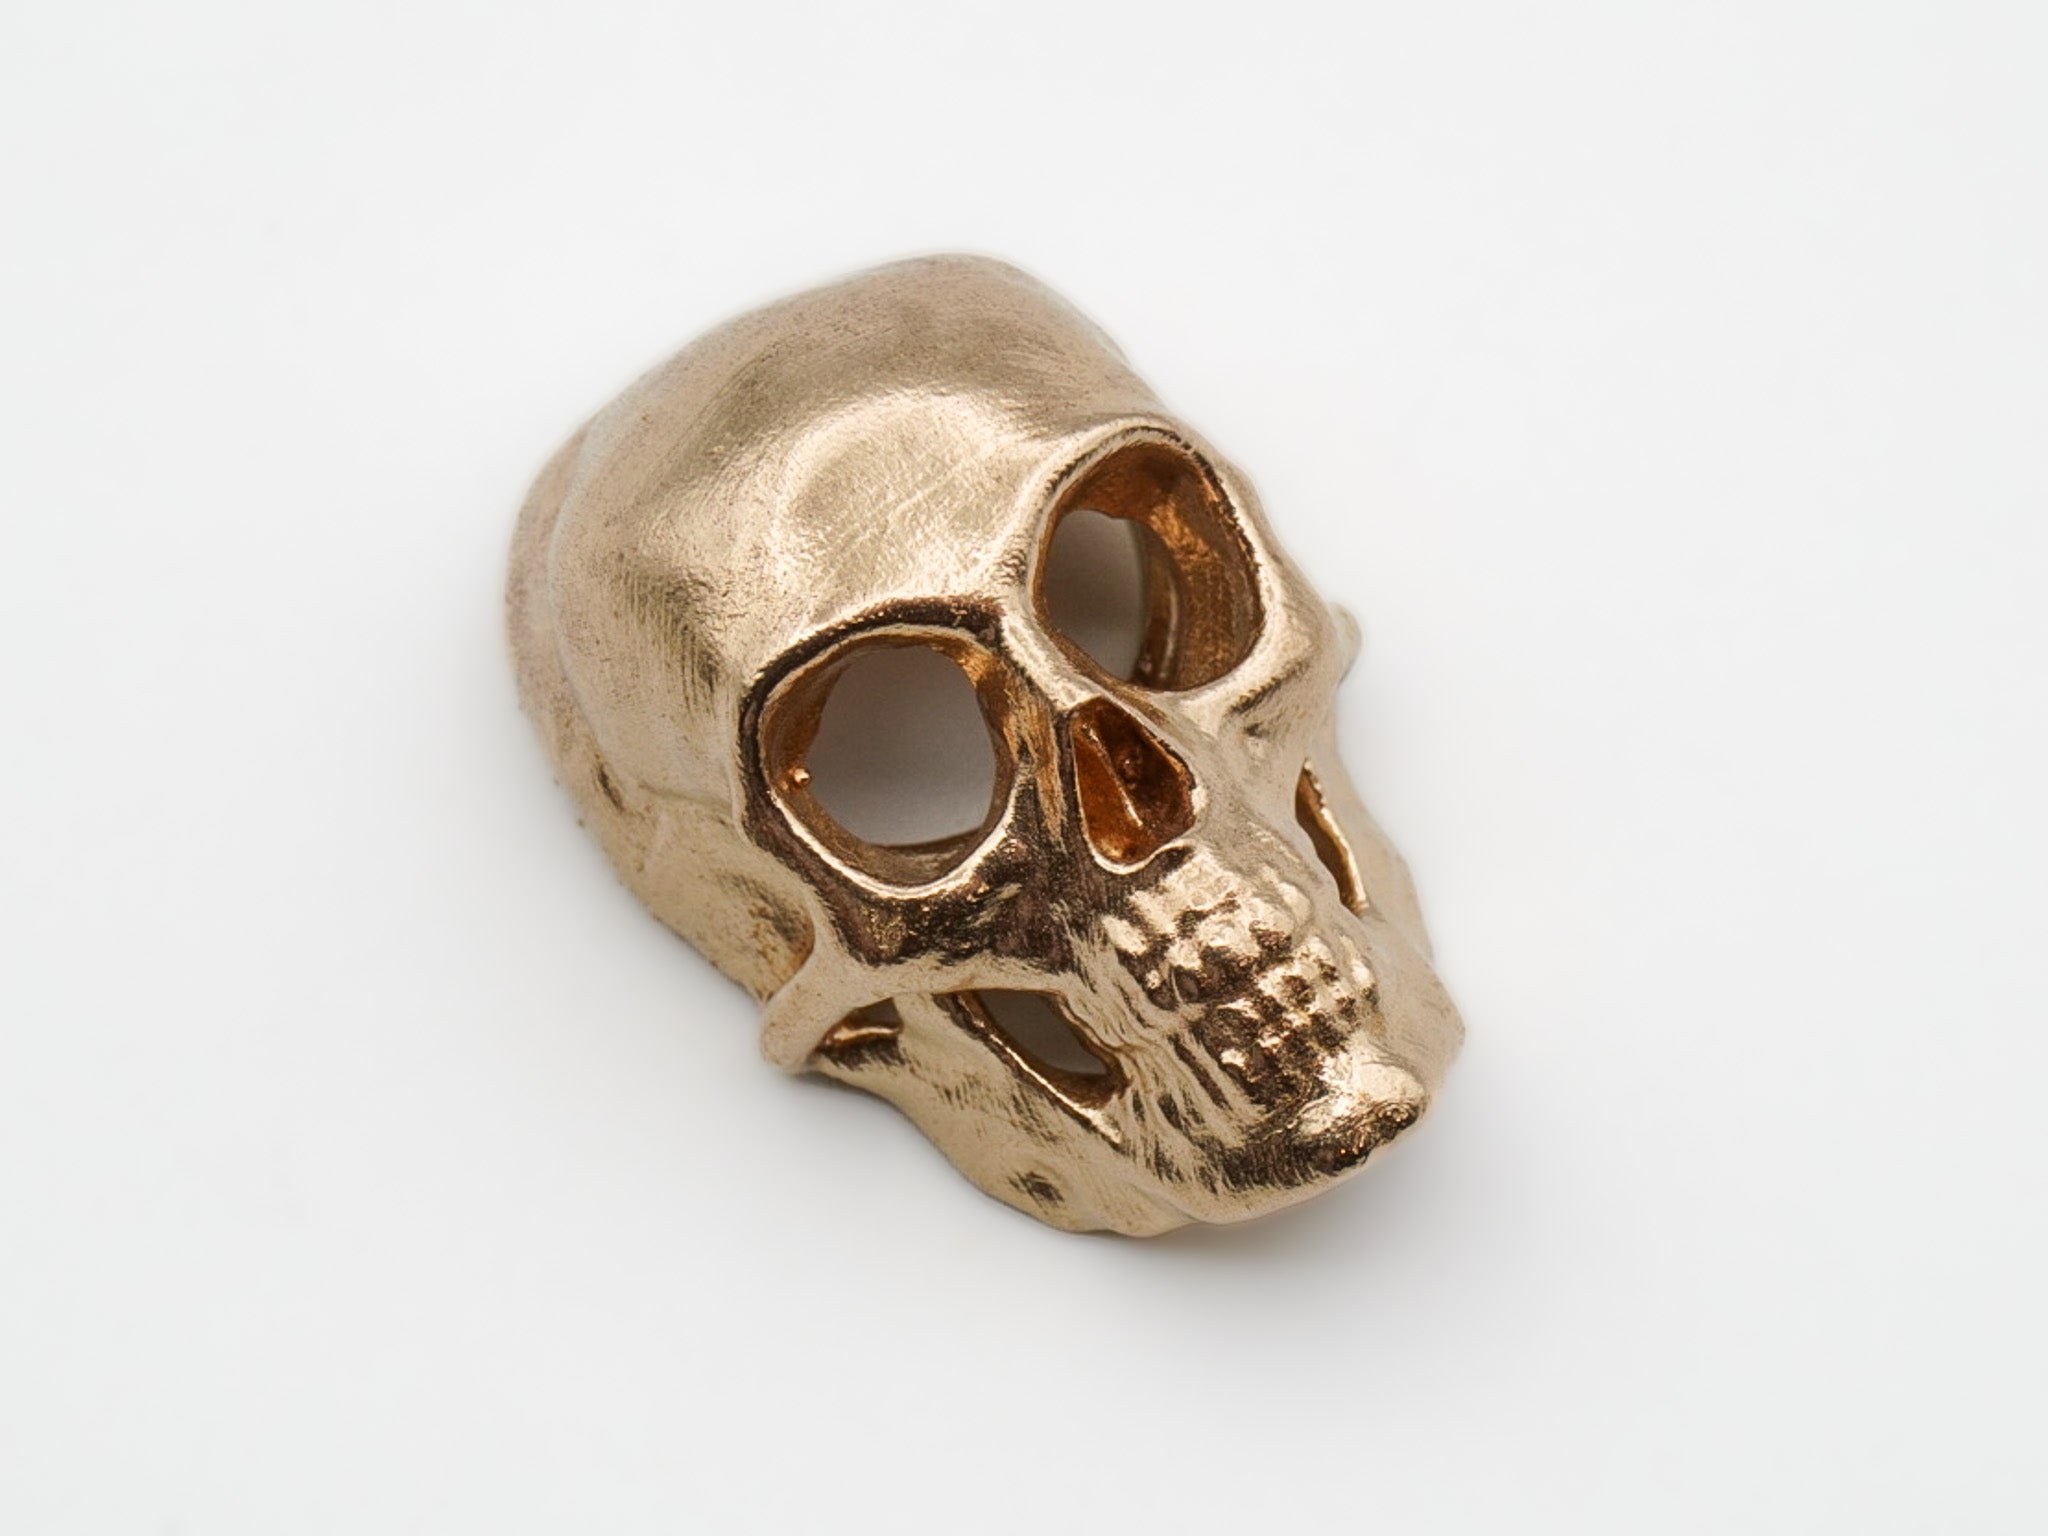 Skull with Flat Back